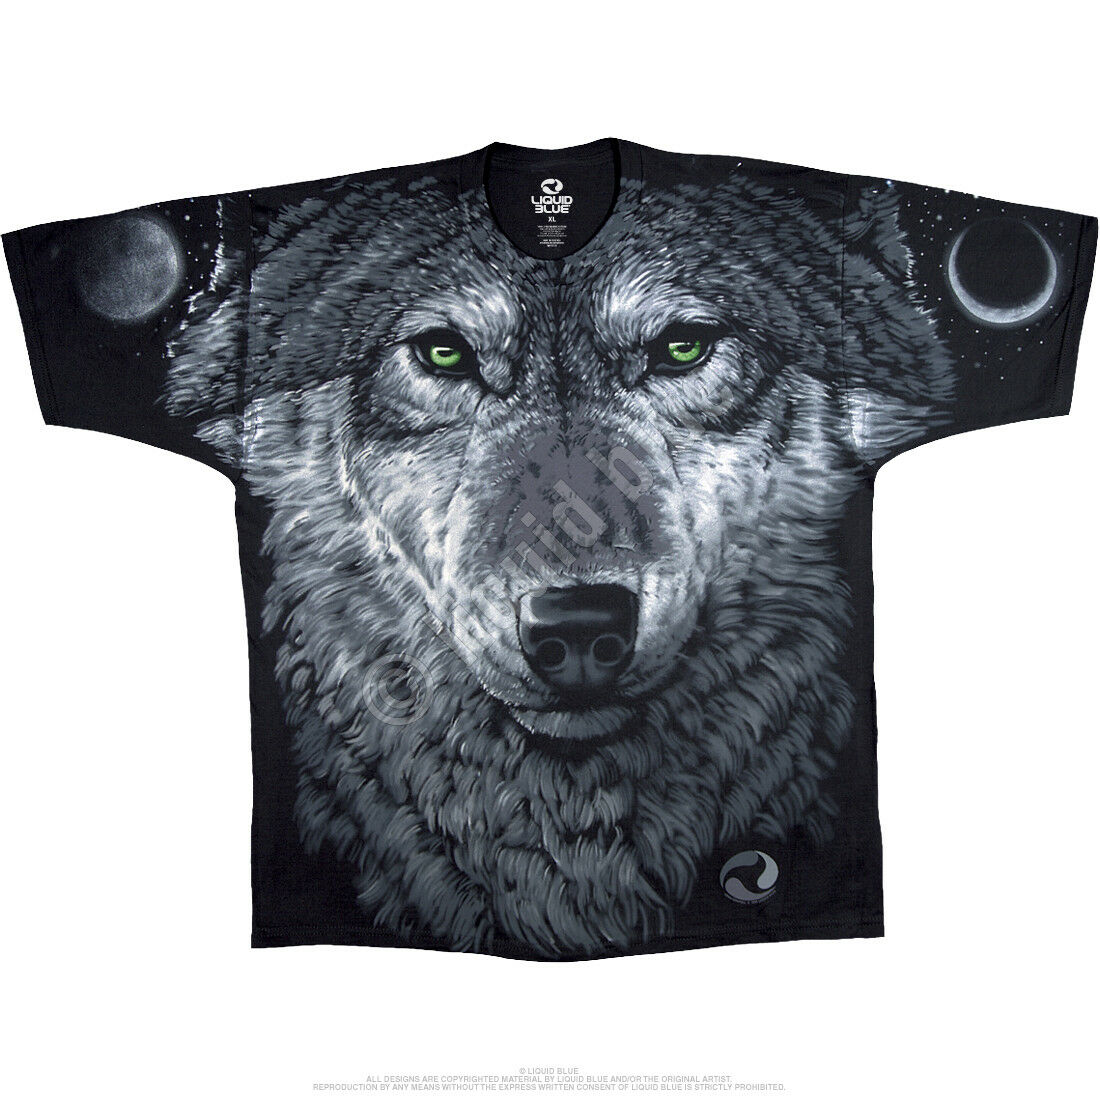 Arctic Wolf Overall Large Print 2 Sided T Shirt S M L Xl Xxl 3x 4x 5x 6x Moon Xetsy